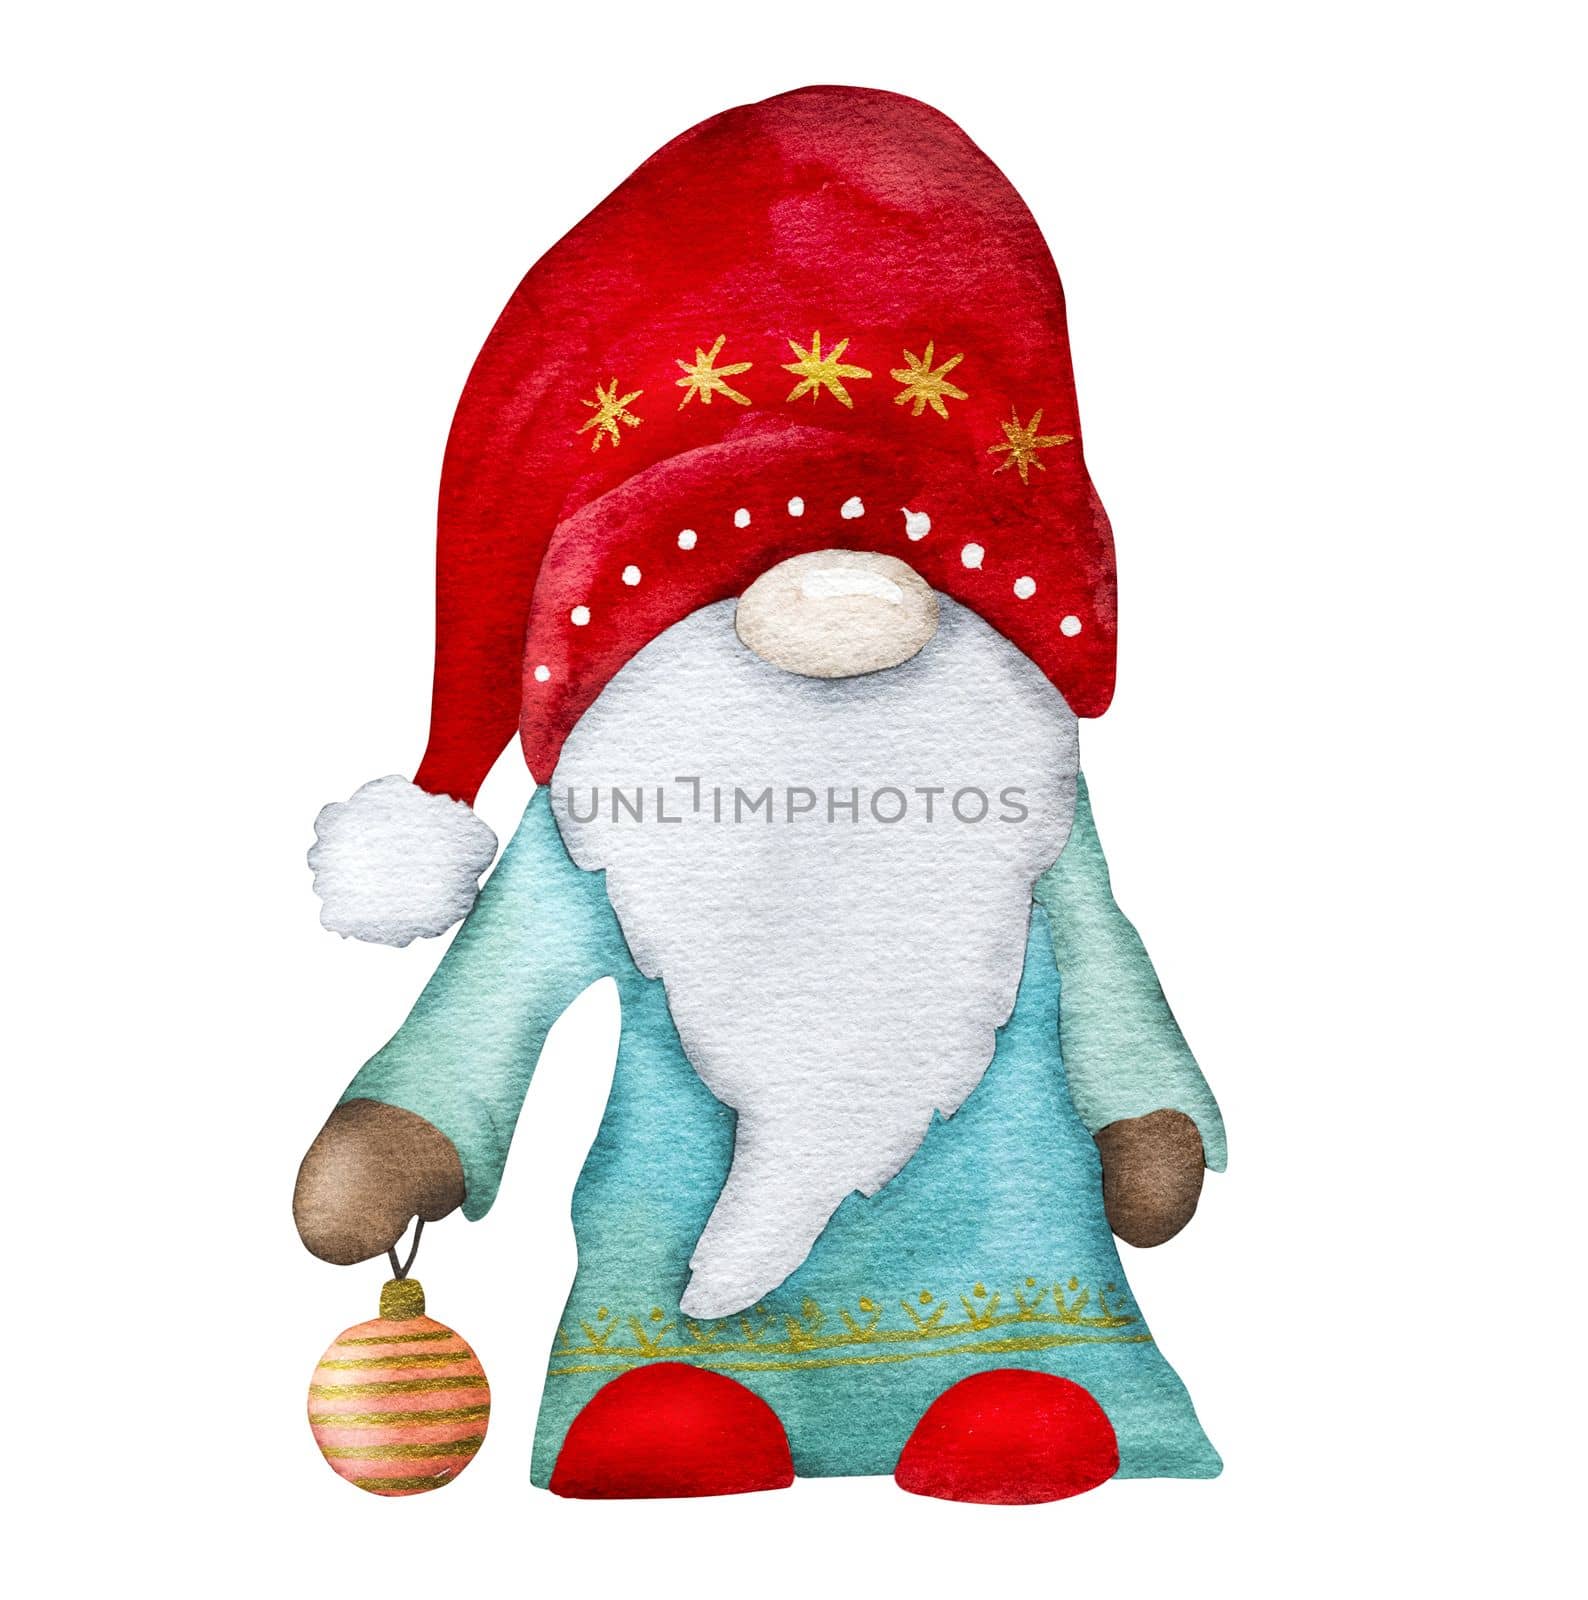 Christmas gnome Santa Claus helper winter watercoor drawing with xmas tree ball toy. New year festive dwarf with traditional holiday decoration